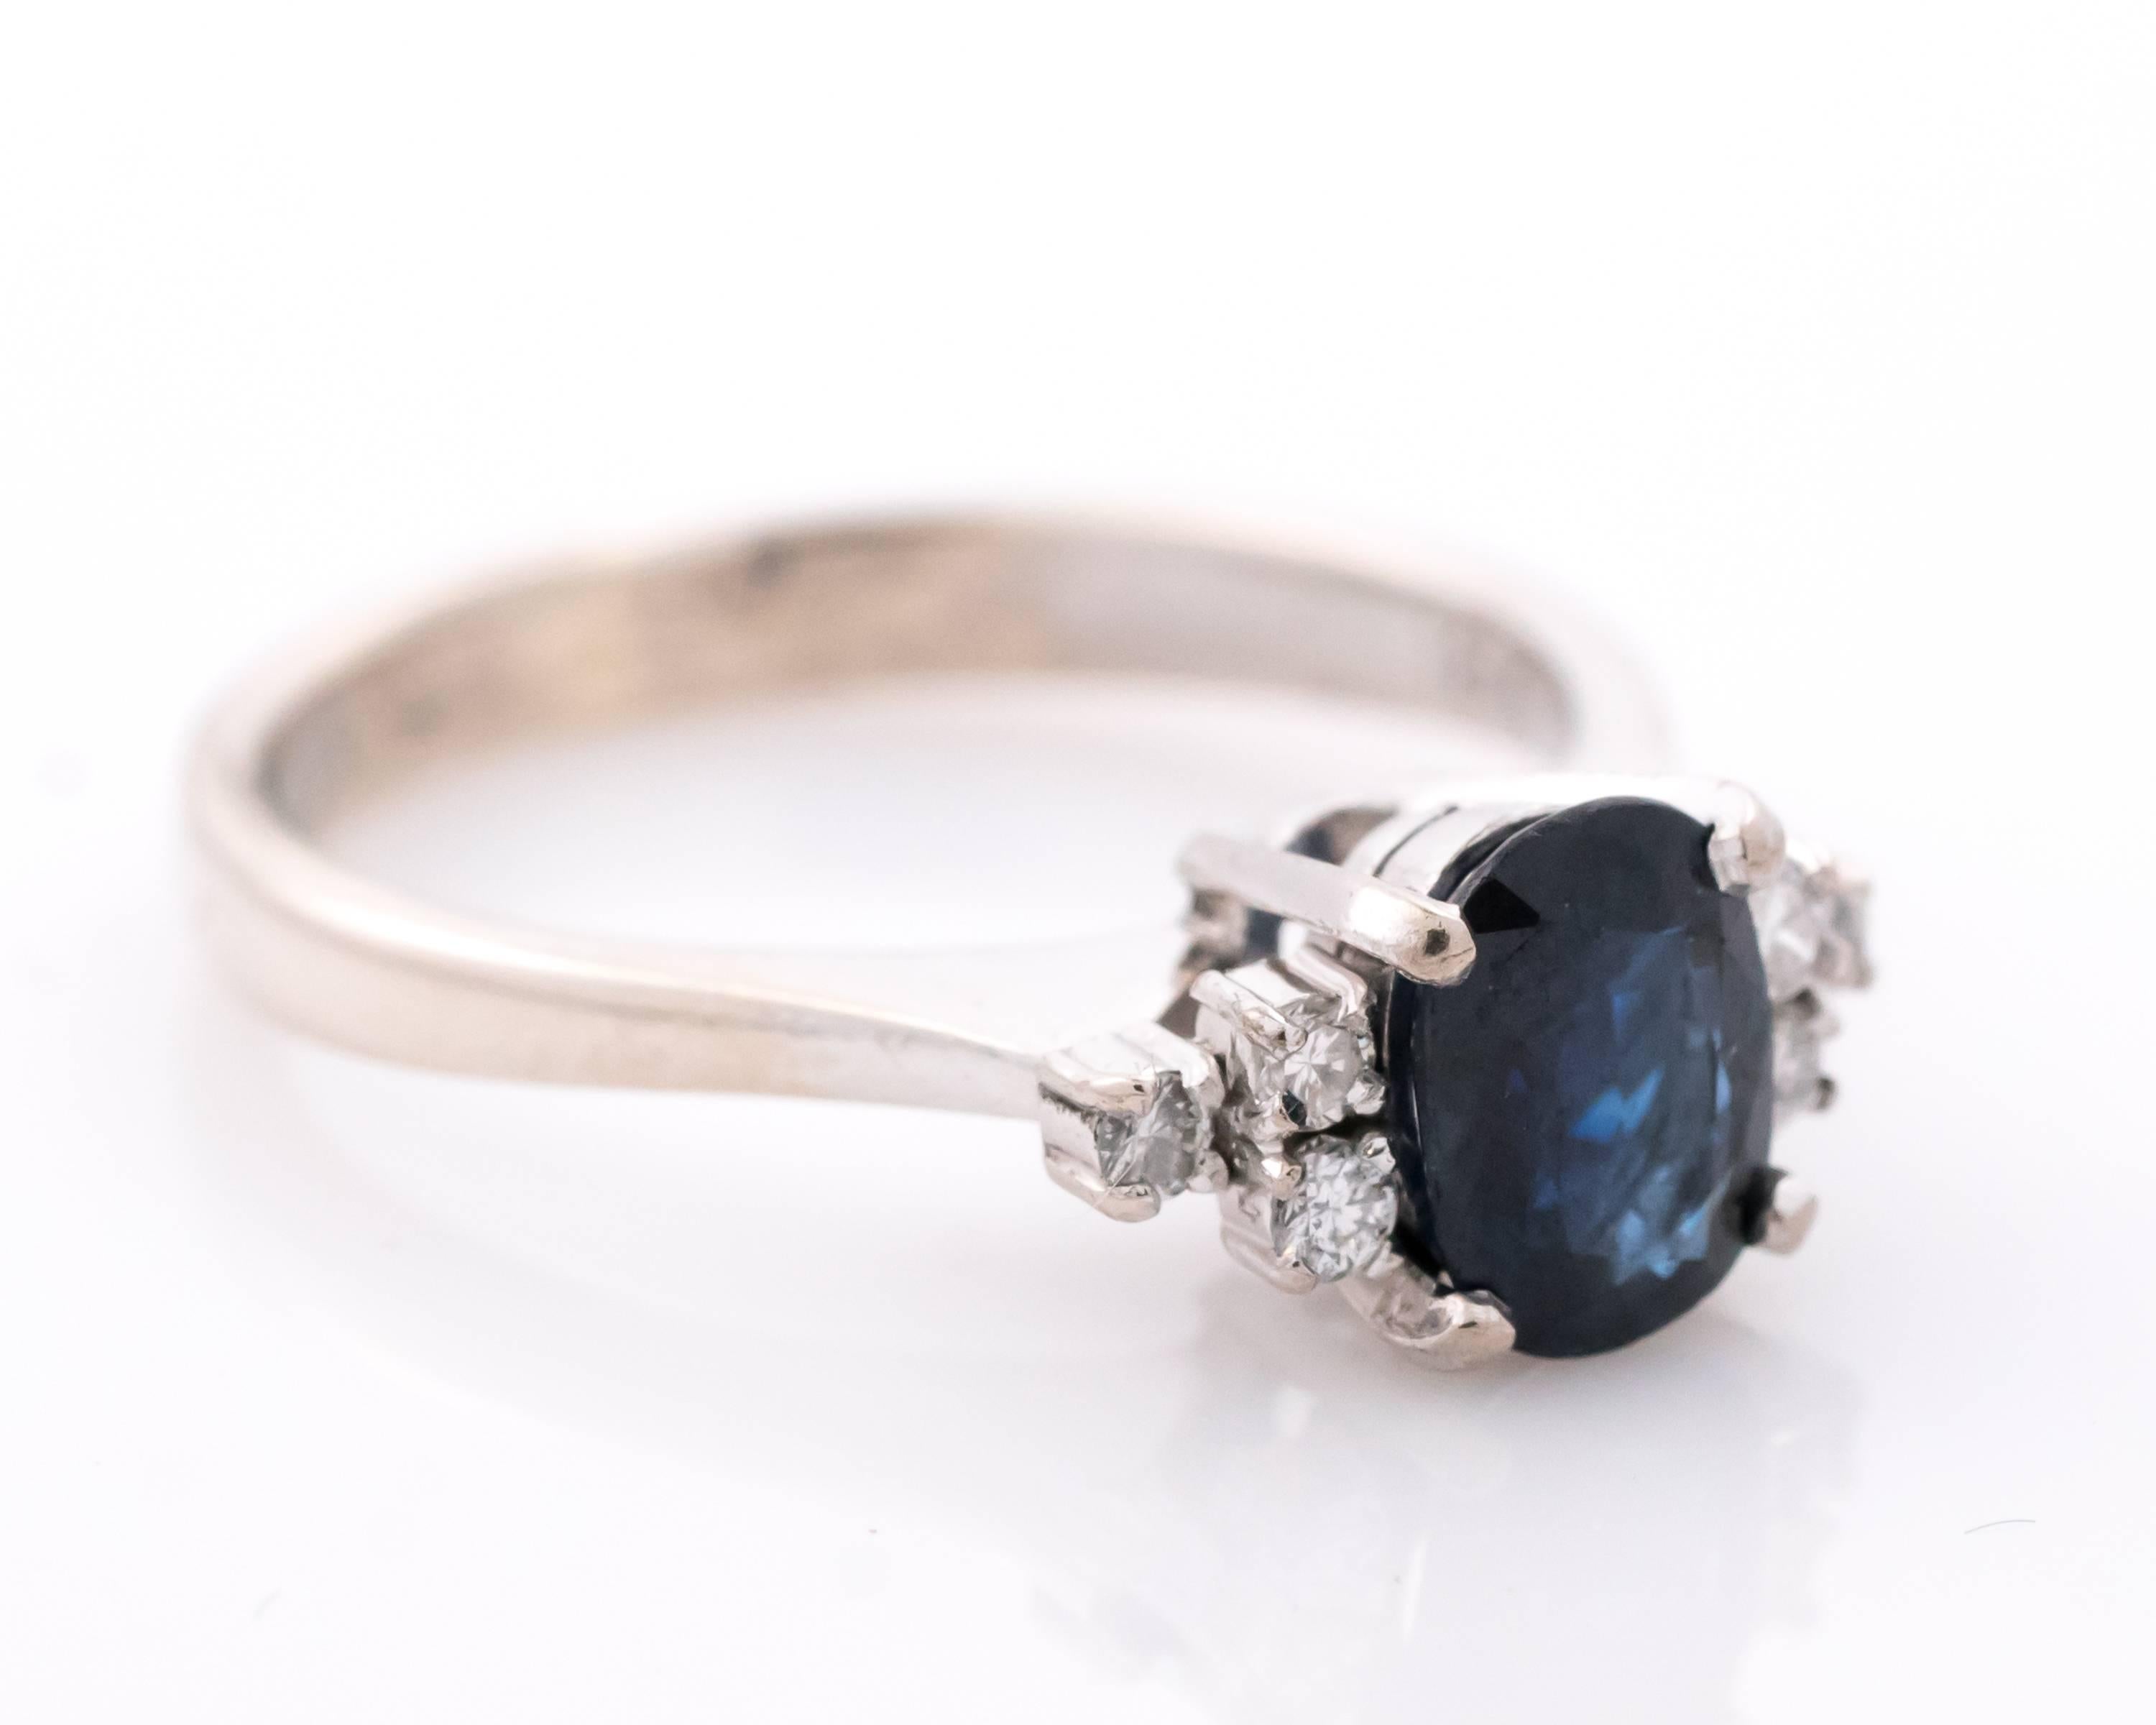 This 1950s retro vintage Blue Sapphire and accent Diamond Ring features a Cathedral Setting with Gallery. The 1 Carat Oval Blue Sapphire center stone is flanked by 6 round brilliant Diamonds, 3 on each side - perfect add of sparkle to the